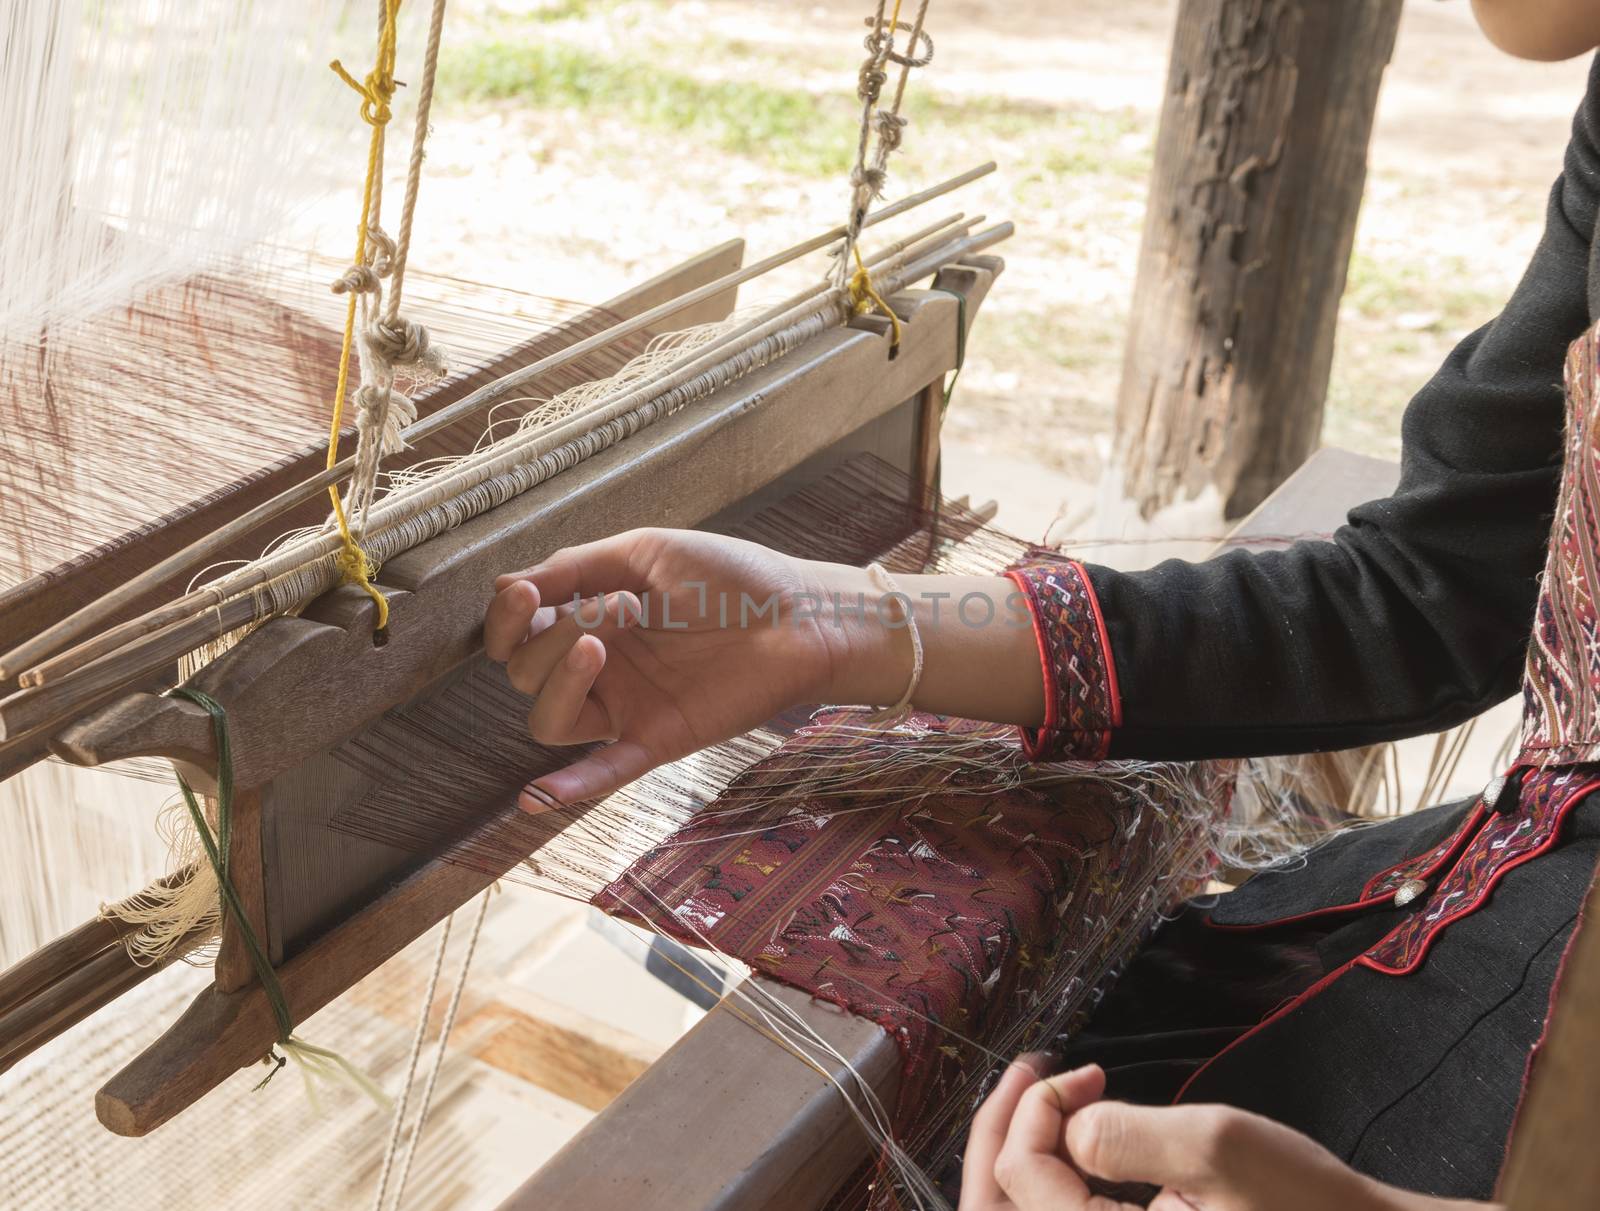 The girl was sitting with hand weaving.